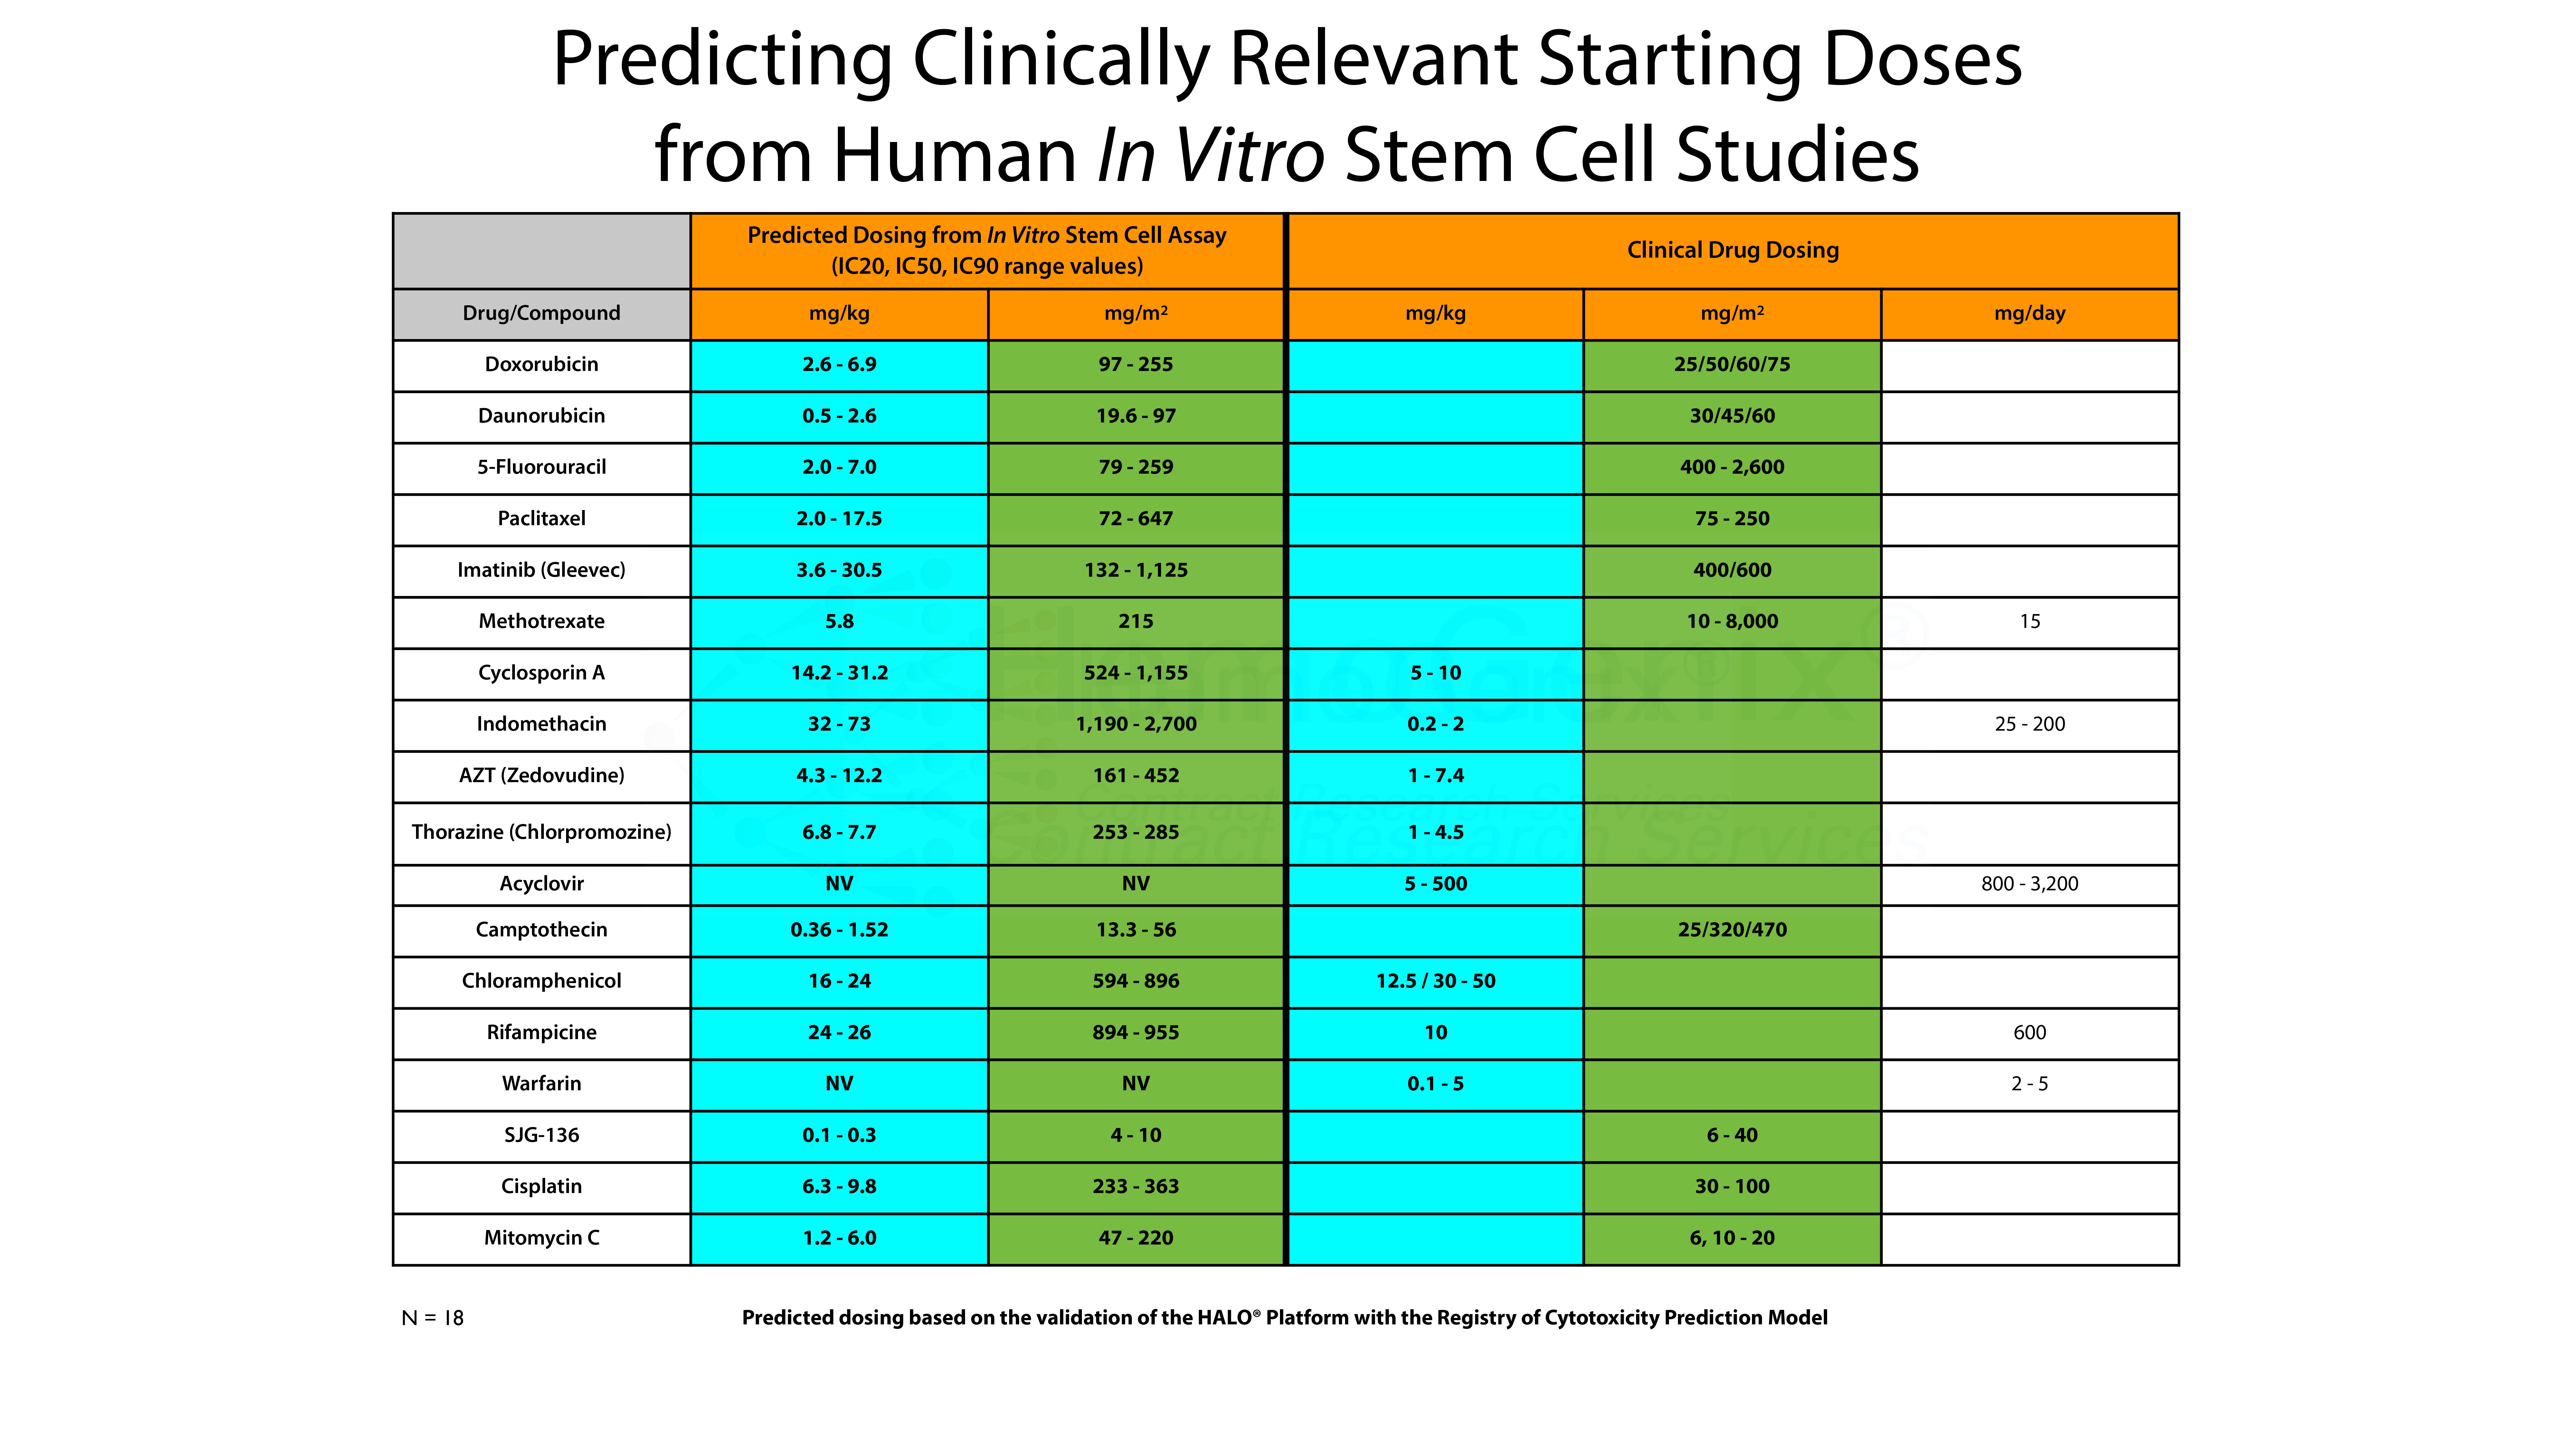 Estimation of Clinical Starting Doses Using HALO-Tox HT